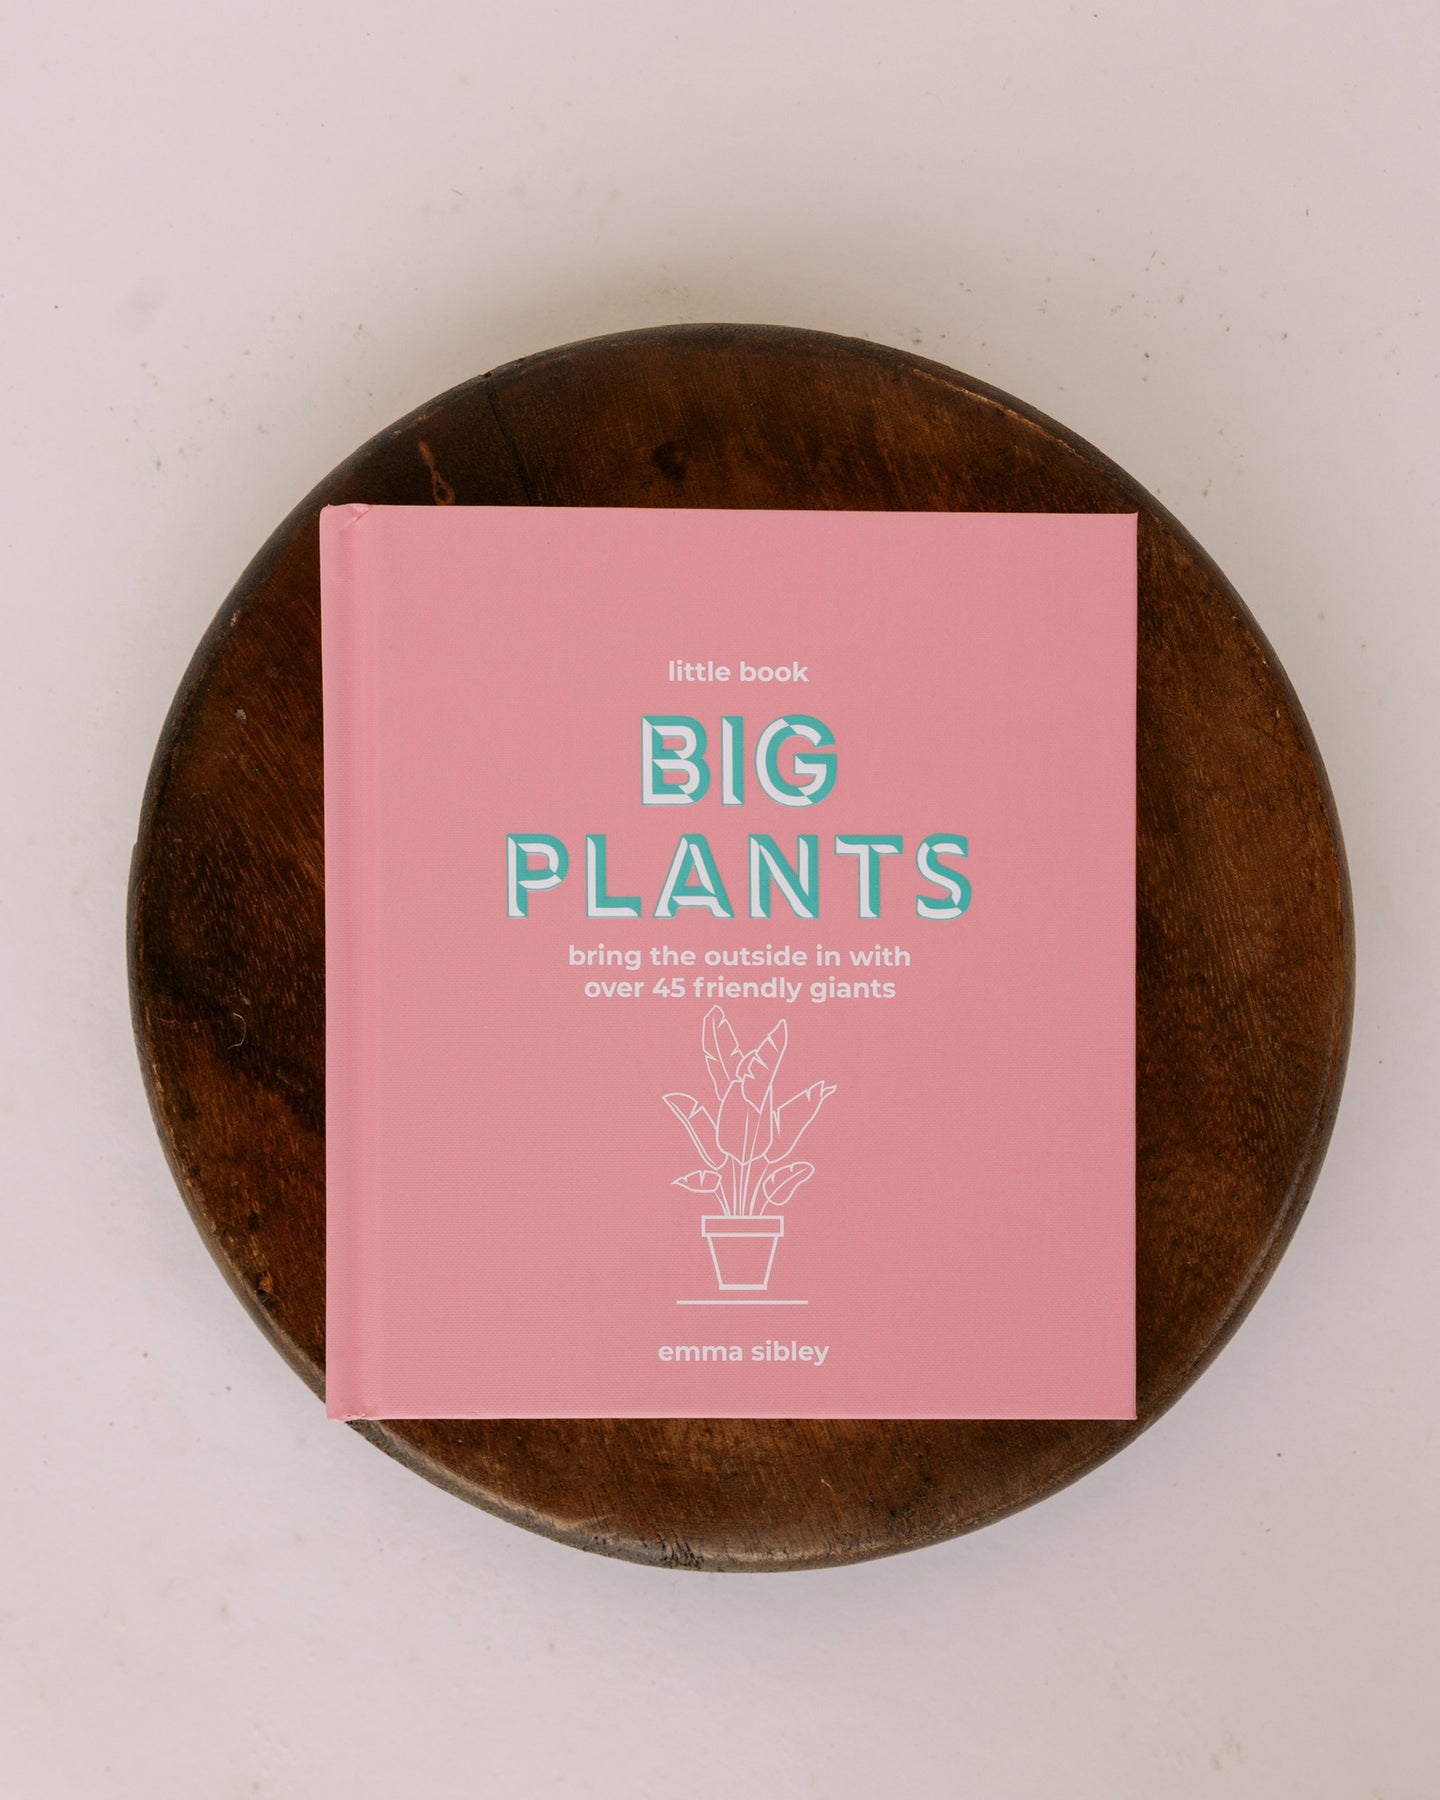 Little Book Big Plants- Bring the outside in with over 45 friendly giants